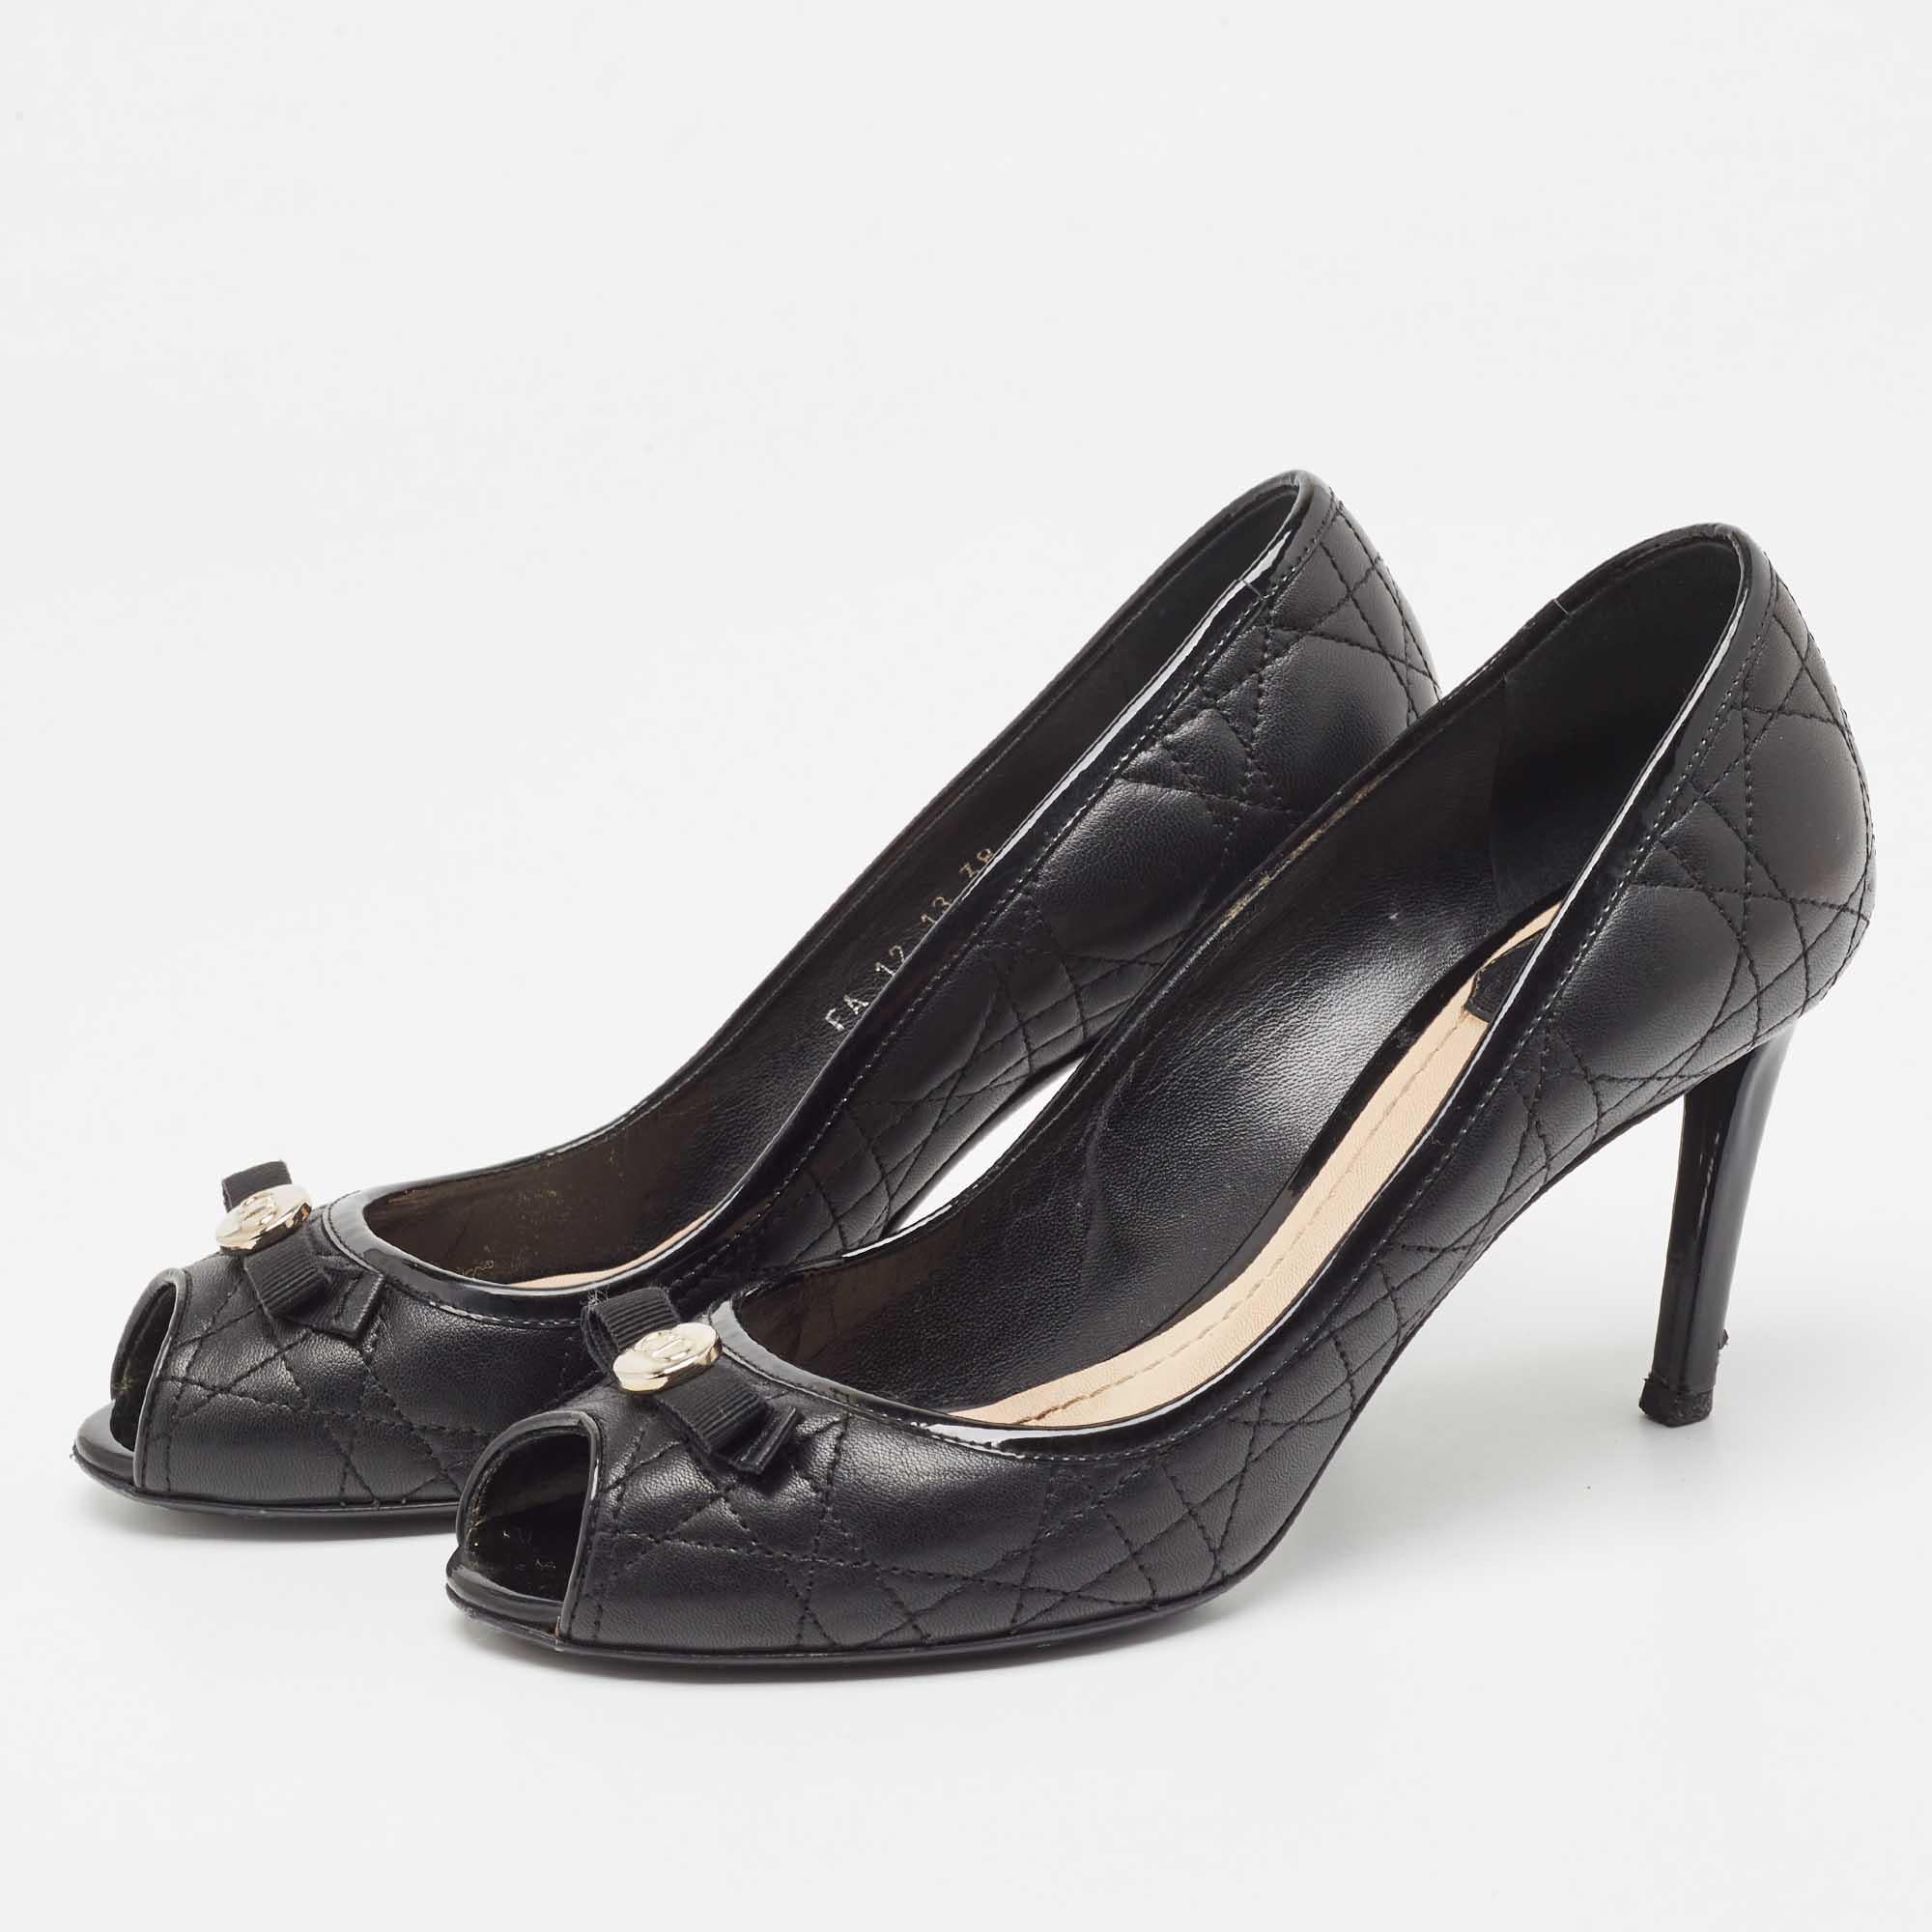 Dior Black Leather and Patent Peep Toe Pumps Size 38 For Sale 2